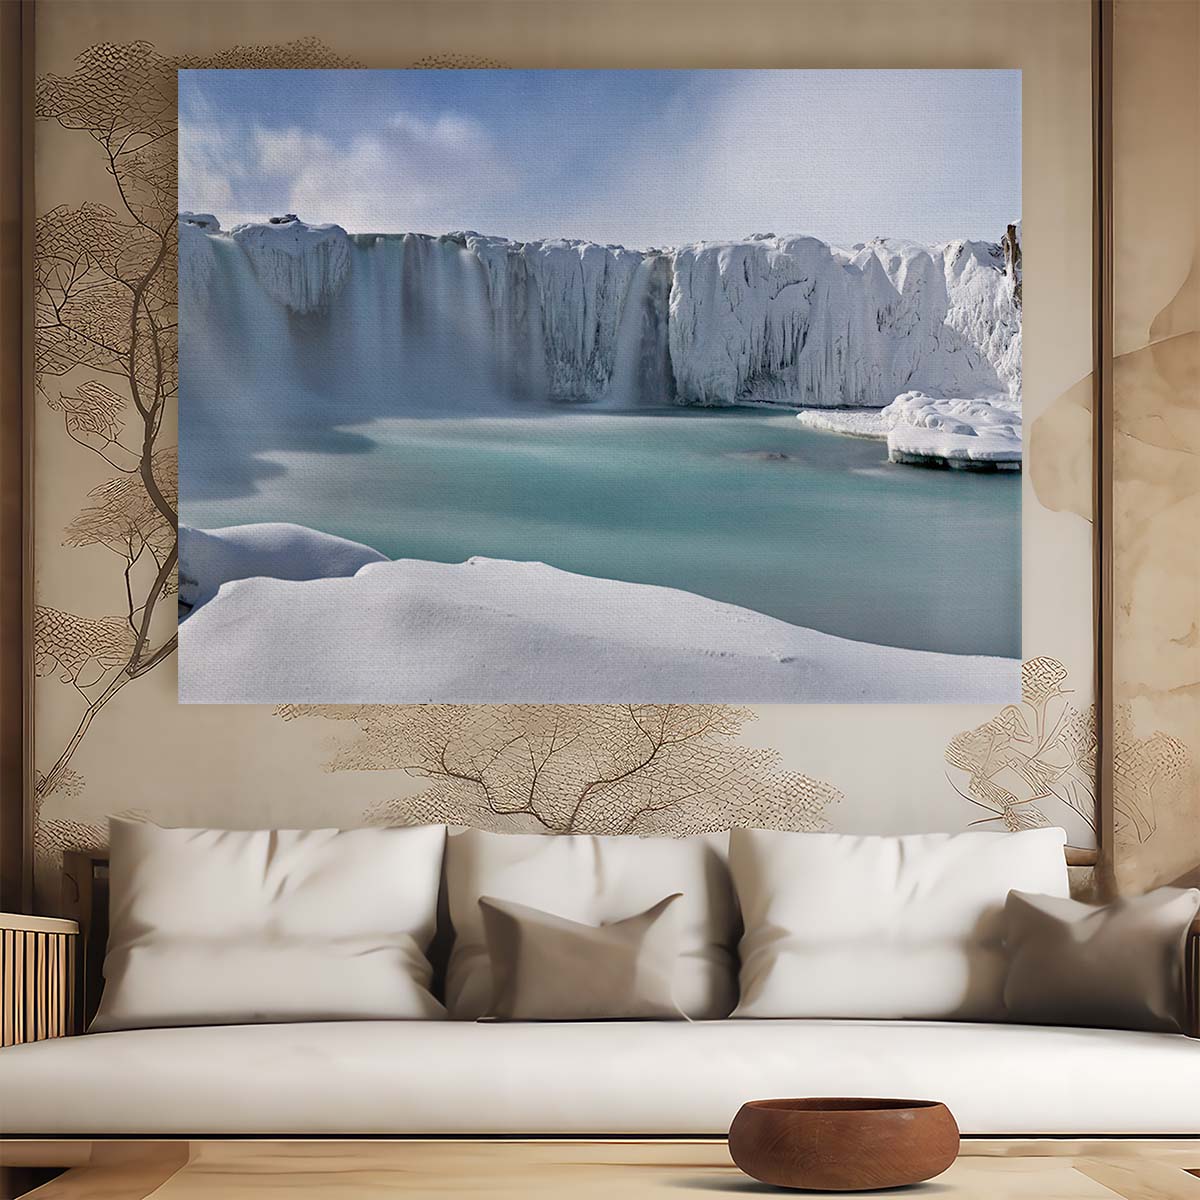 Icelandic Godafoss Frozen Waterfall Panoramic Wall Art by Luxuriance Designs. Made in USA.